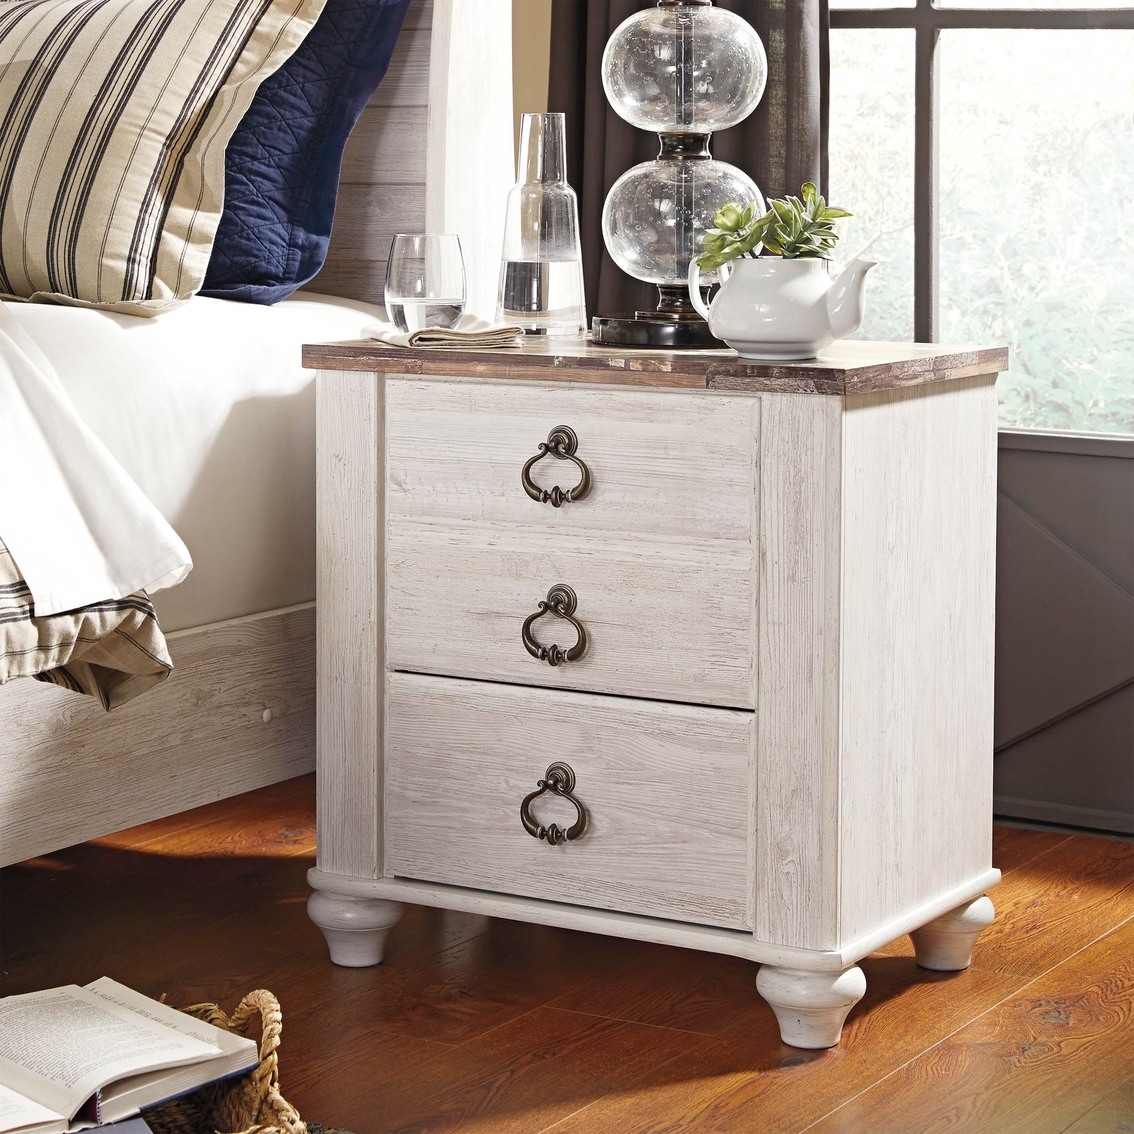 Signature Design by Ashley Willowton Nightstand - Image 3 of 4